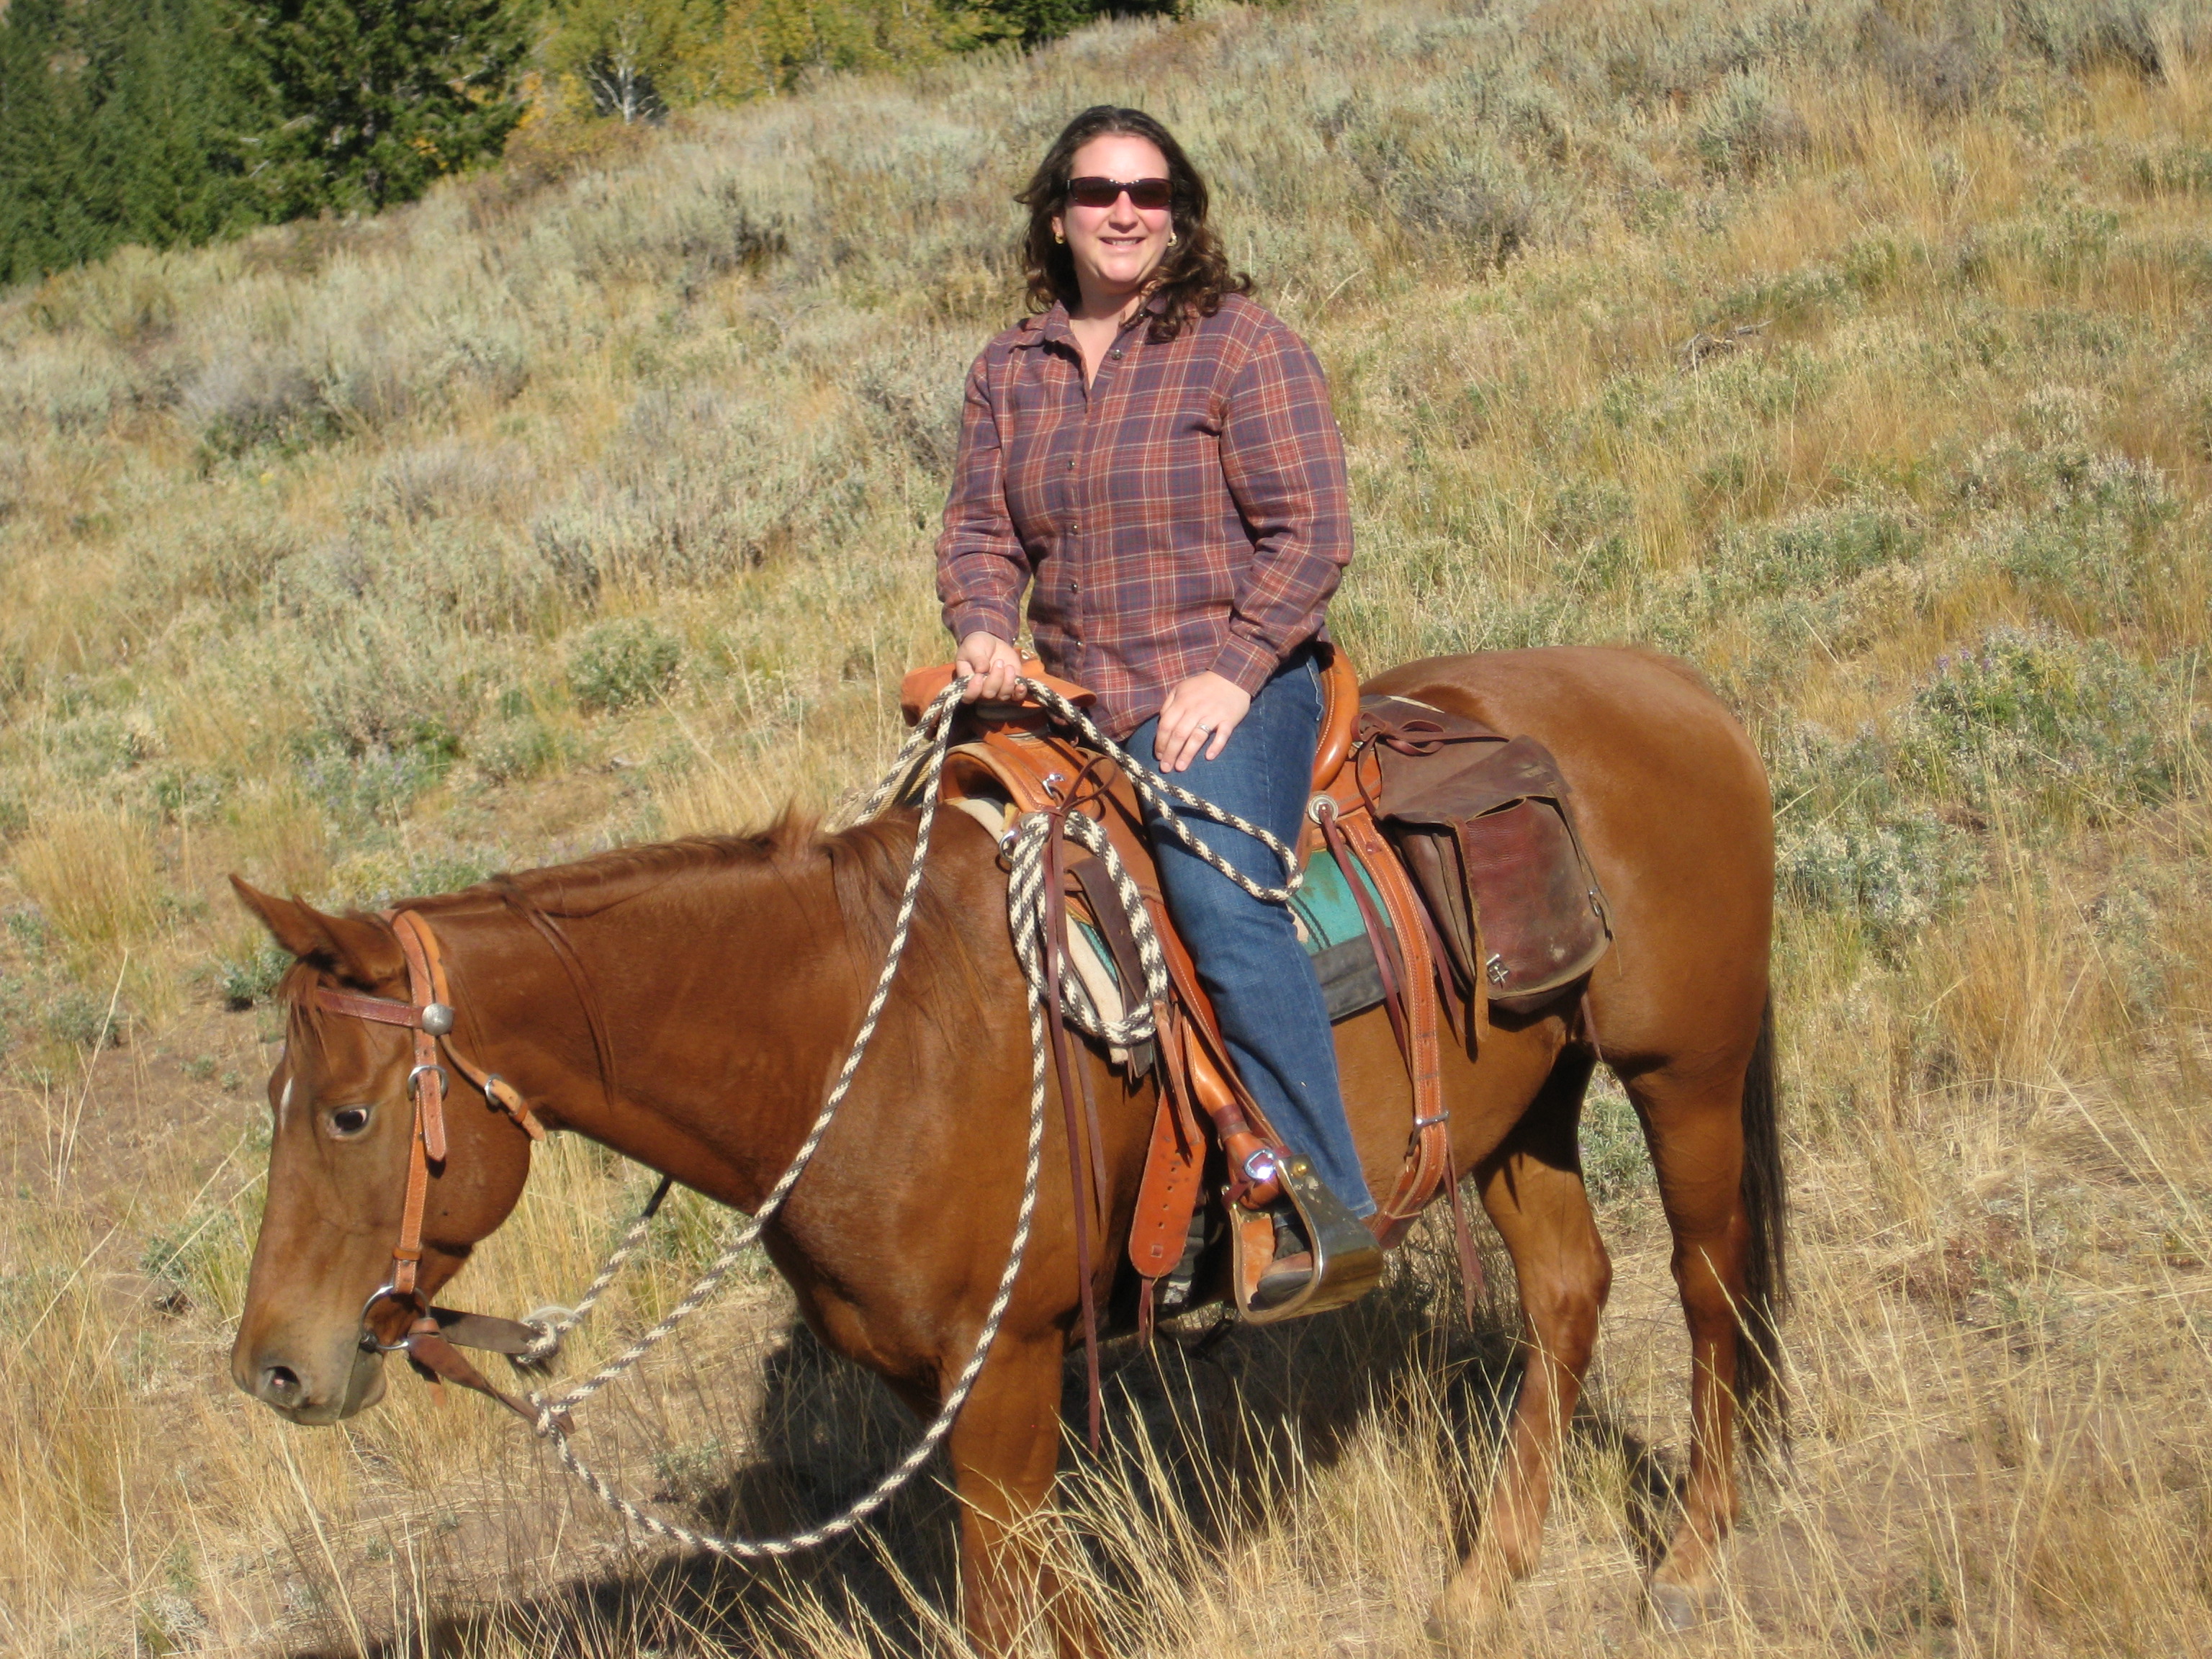 Joanna sitting on a horse in a western saddle surrounded by grasslands.